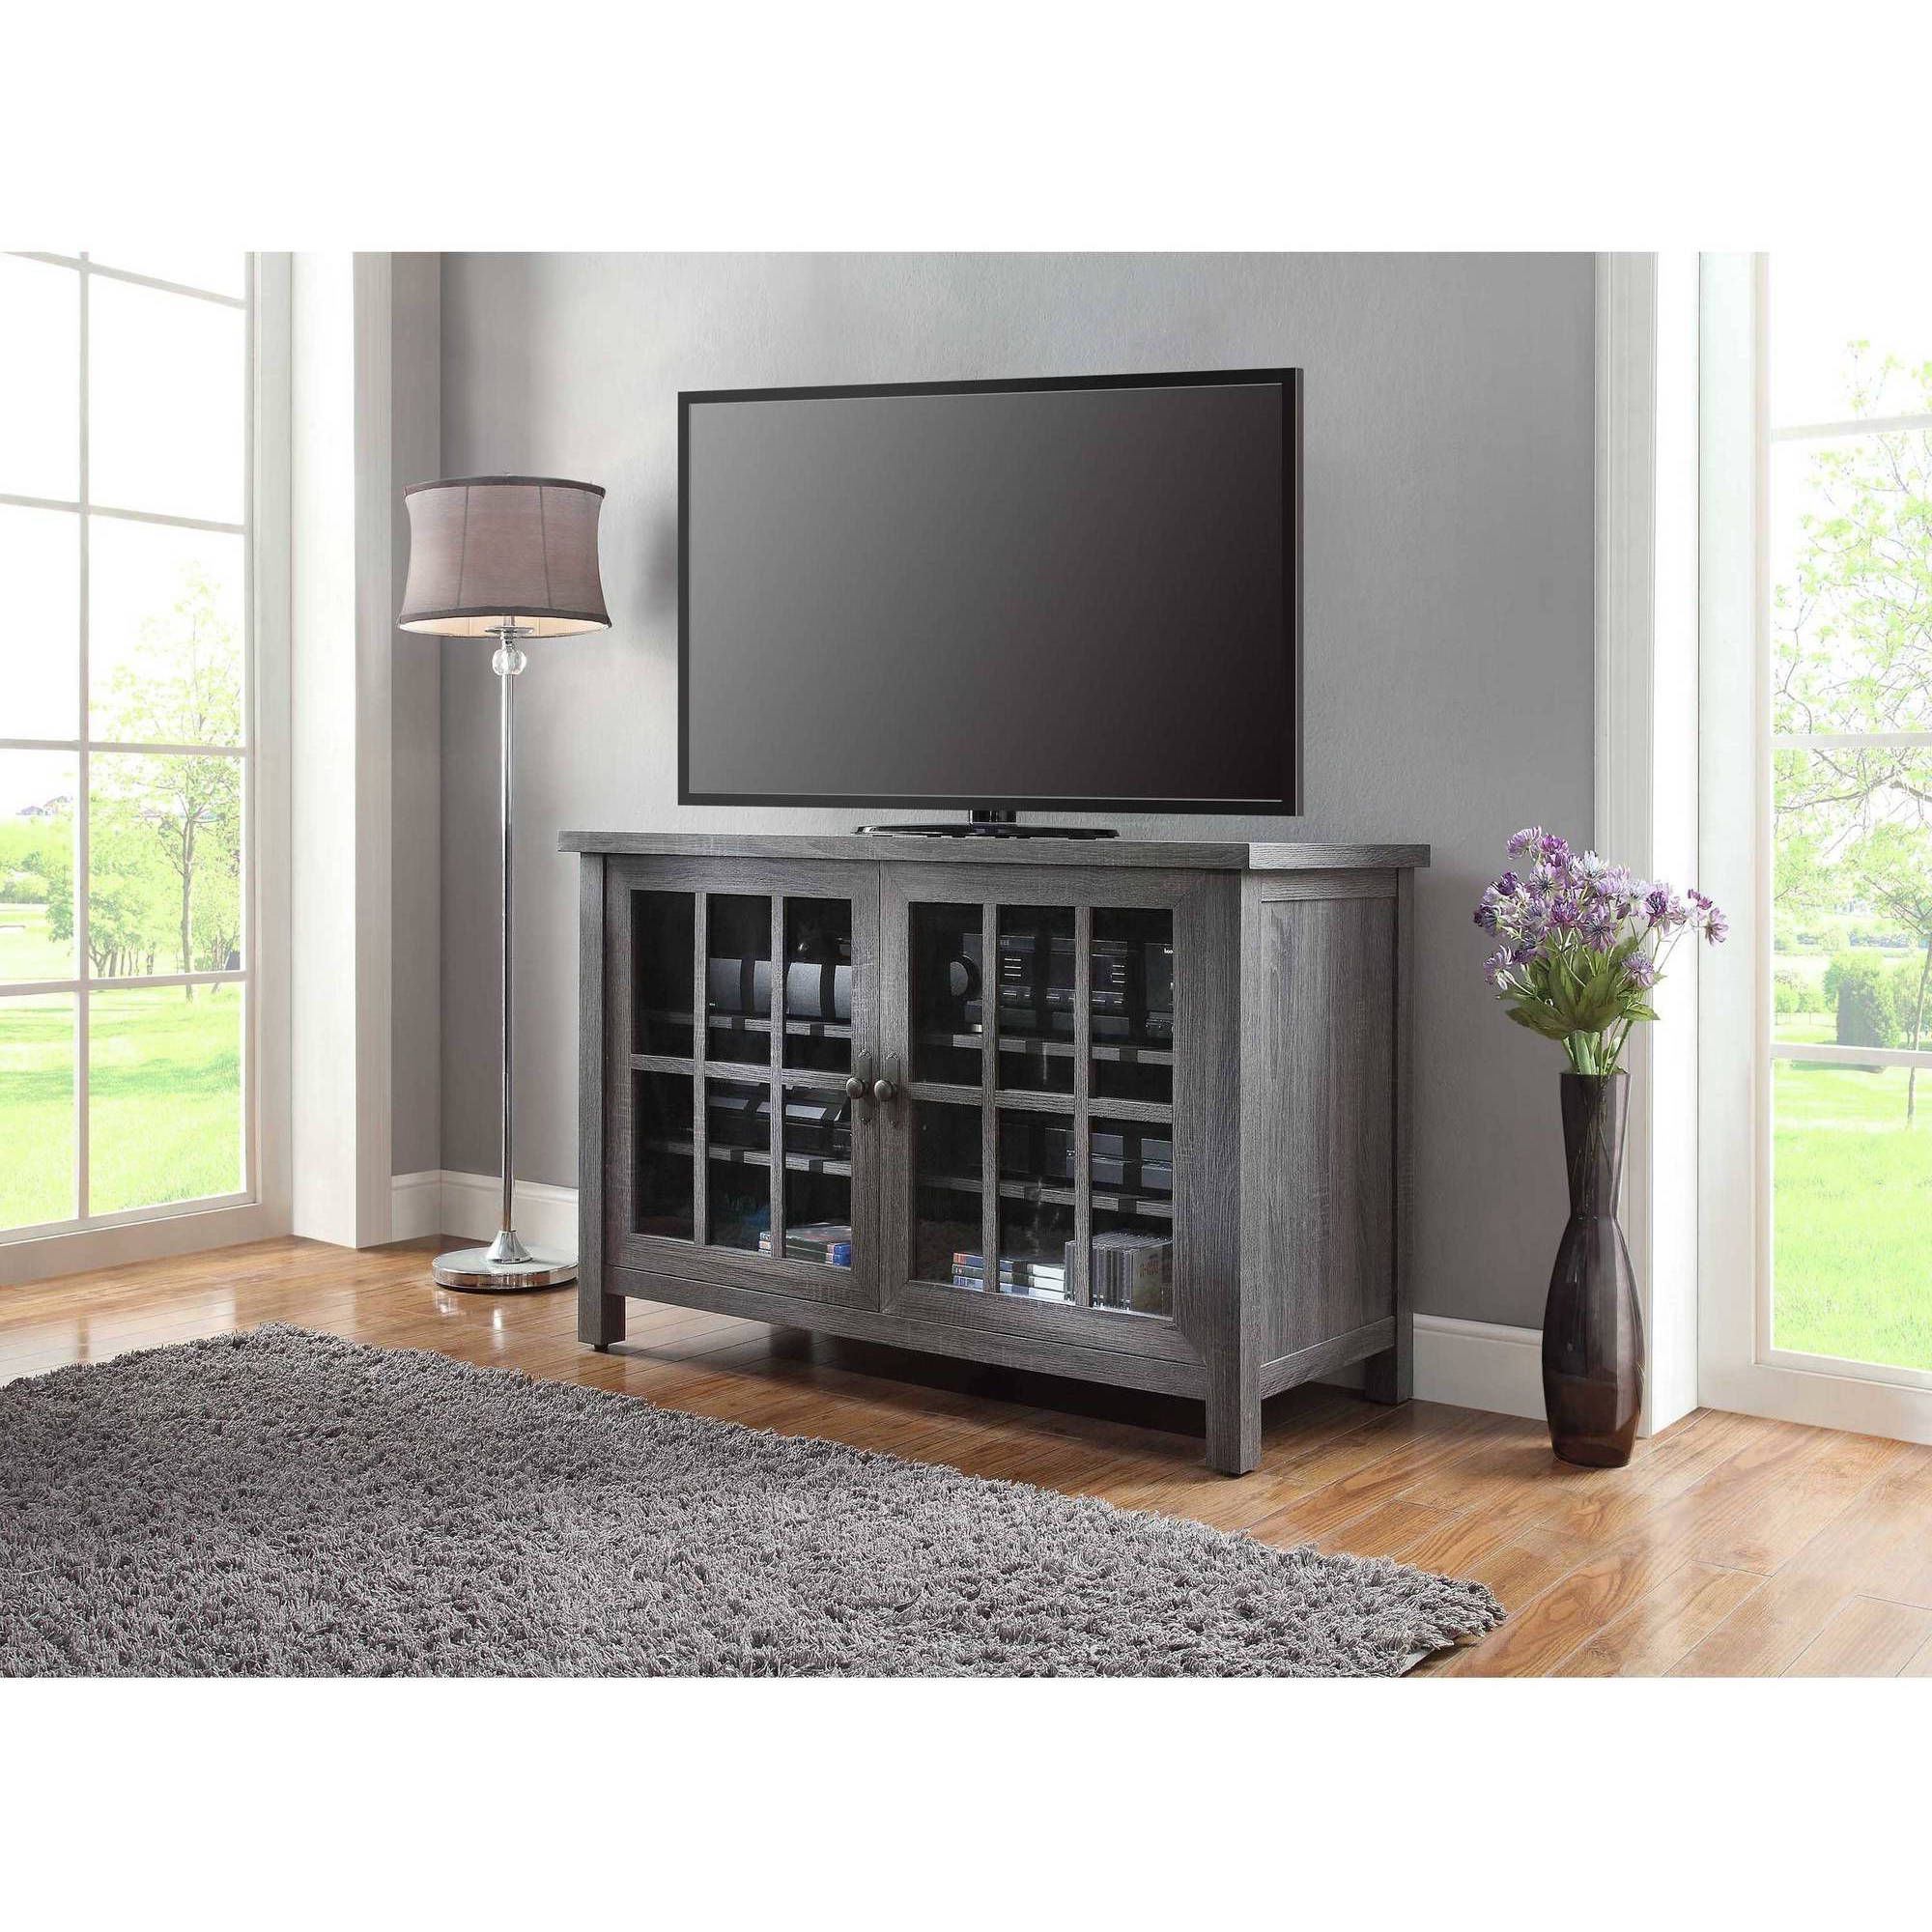 Preferred Better Homes And Gardens Oxford Square Tv Console For Tvs Up To 55 Intended For Oxford 70 Inch Tv Stands (Photo 3 of 20)